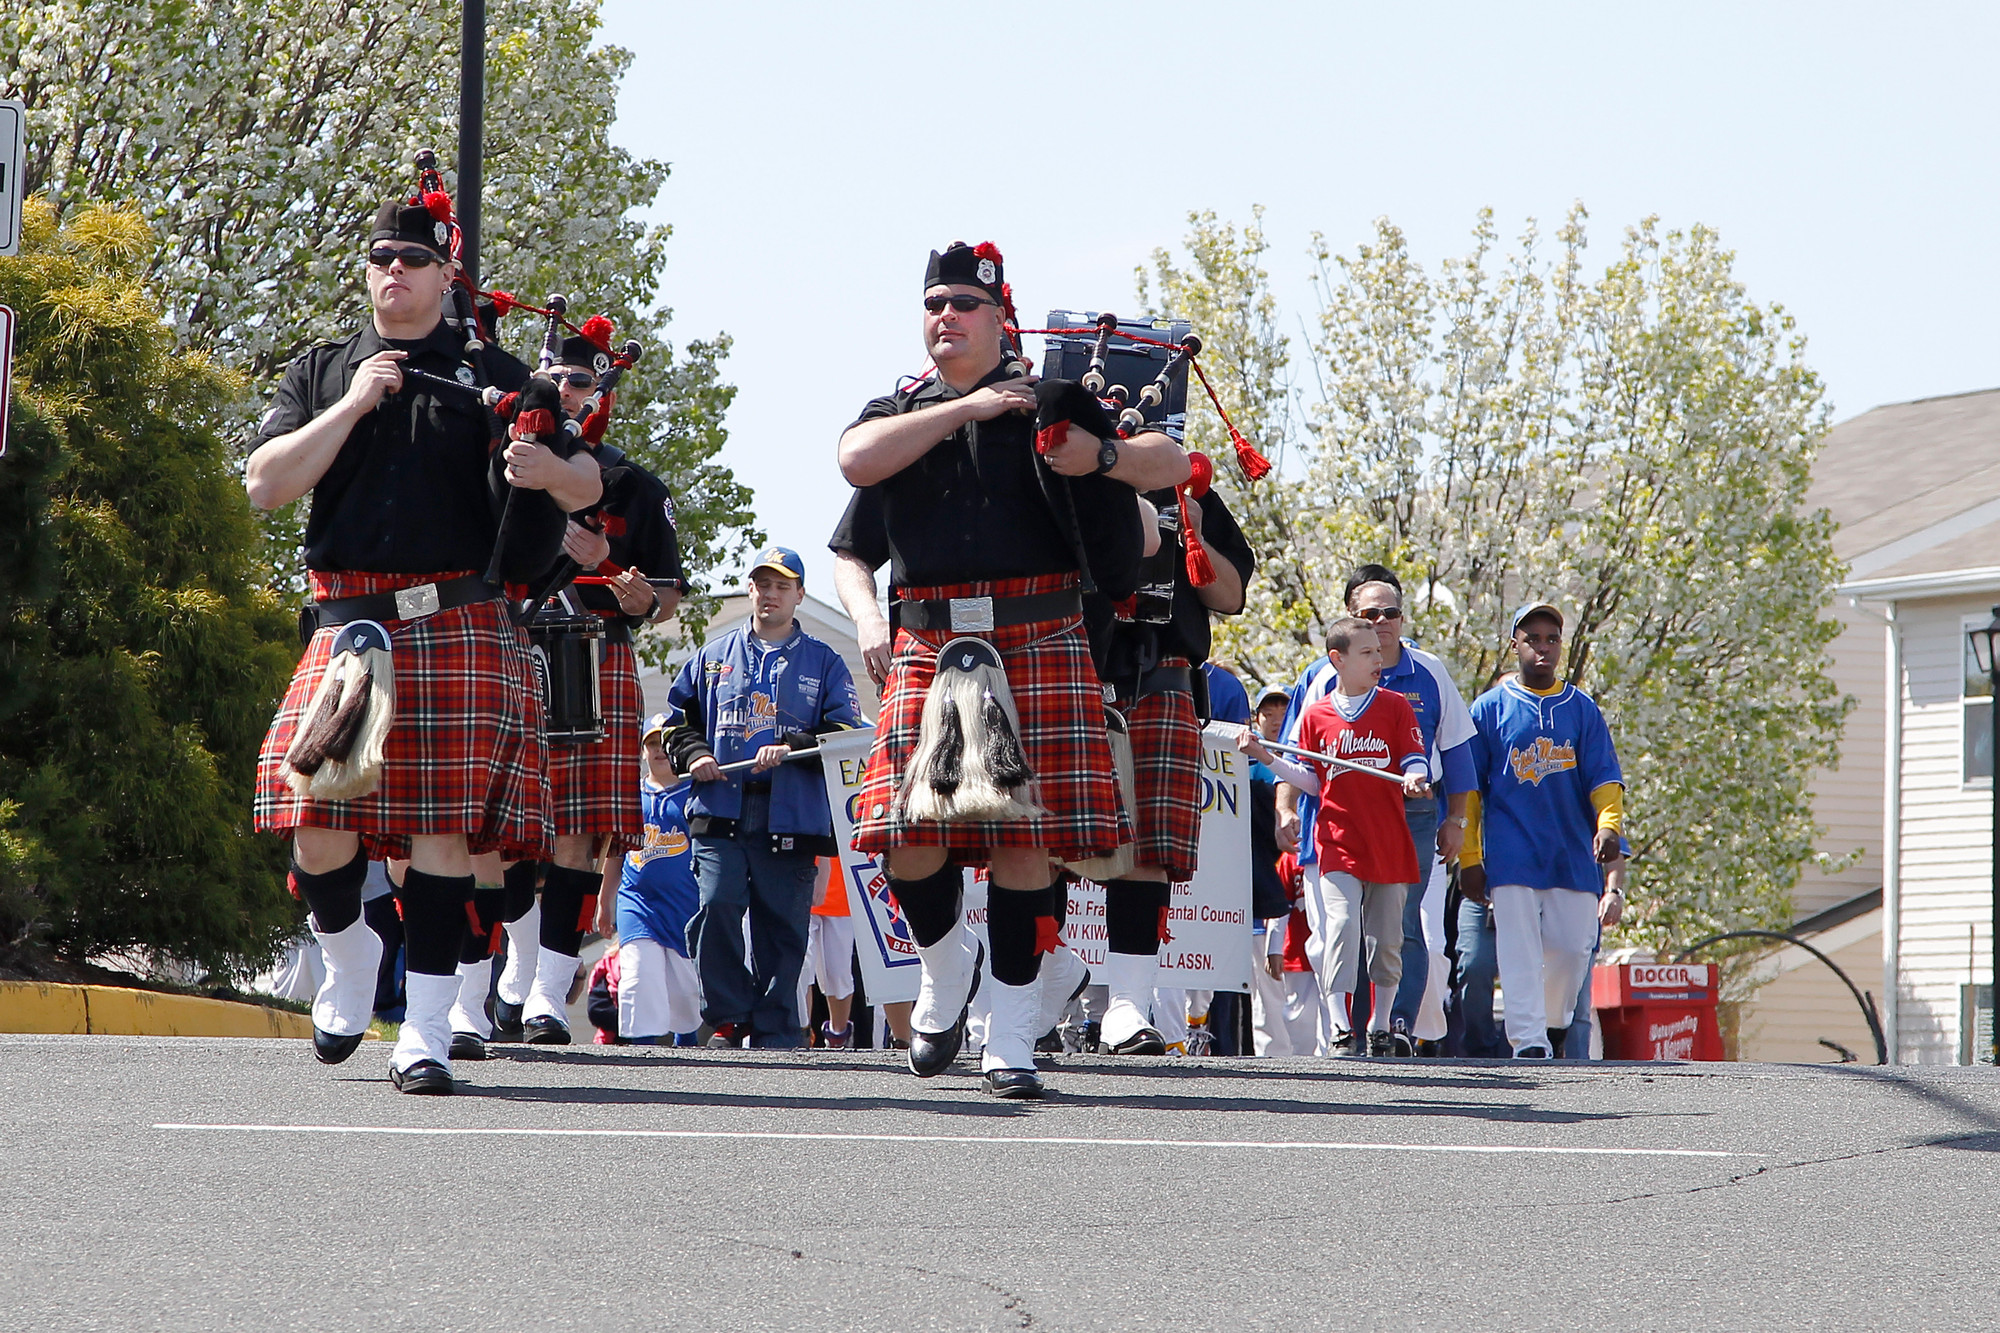 The Nassau County Firefighters Bag Pipes and Drum Corps and the Challenger Division players led the East Meadow Baseball Softball Association parade as it entered the ball field complex on Merrick Avenue.